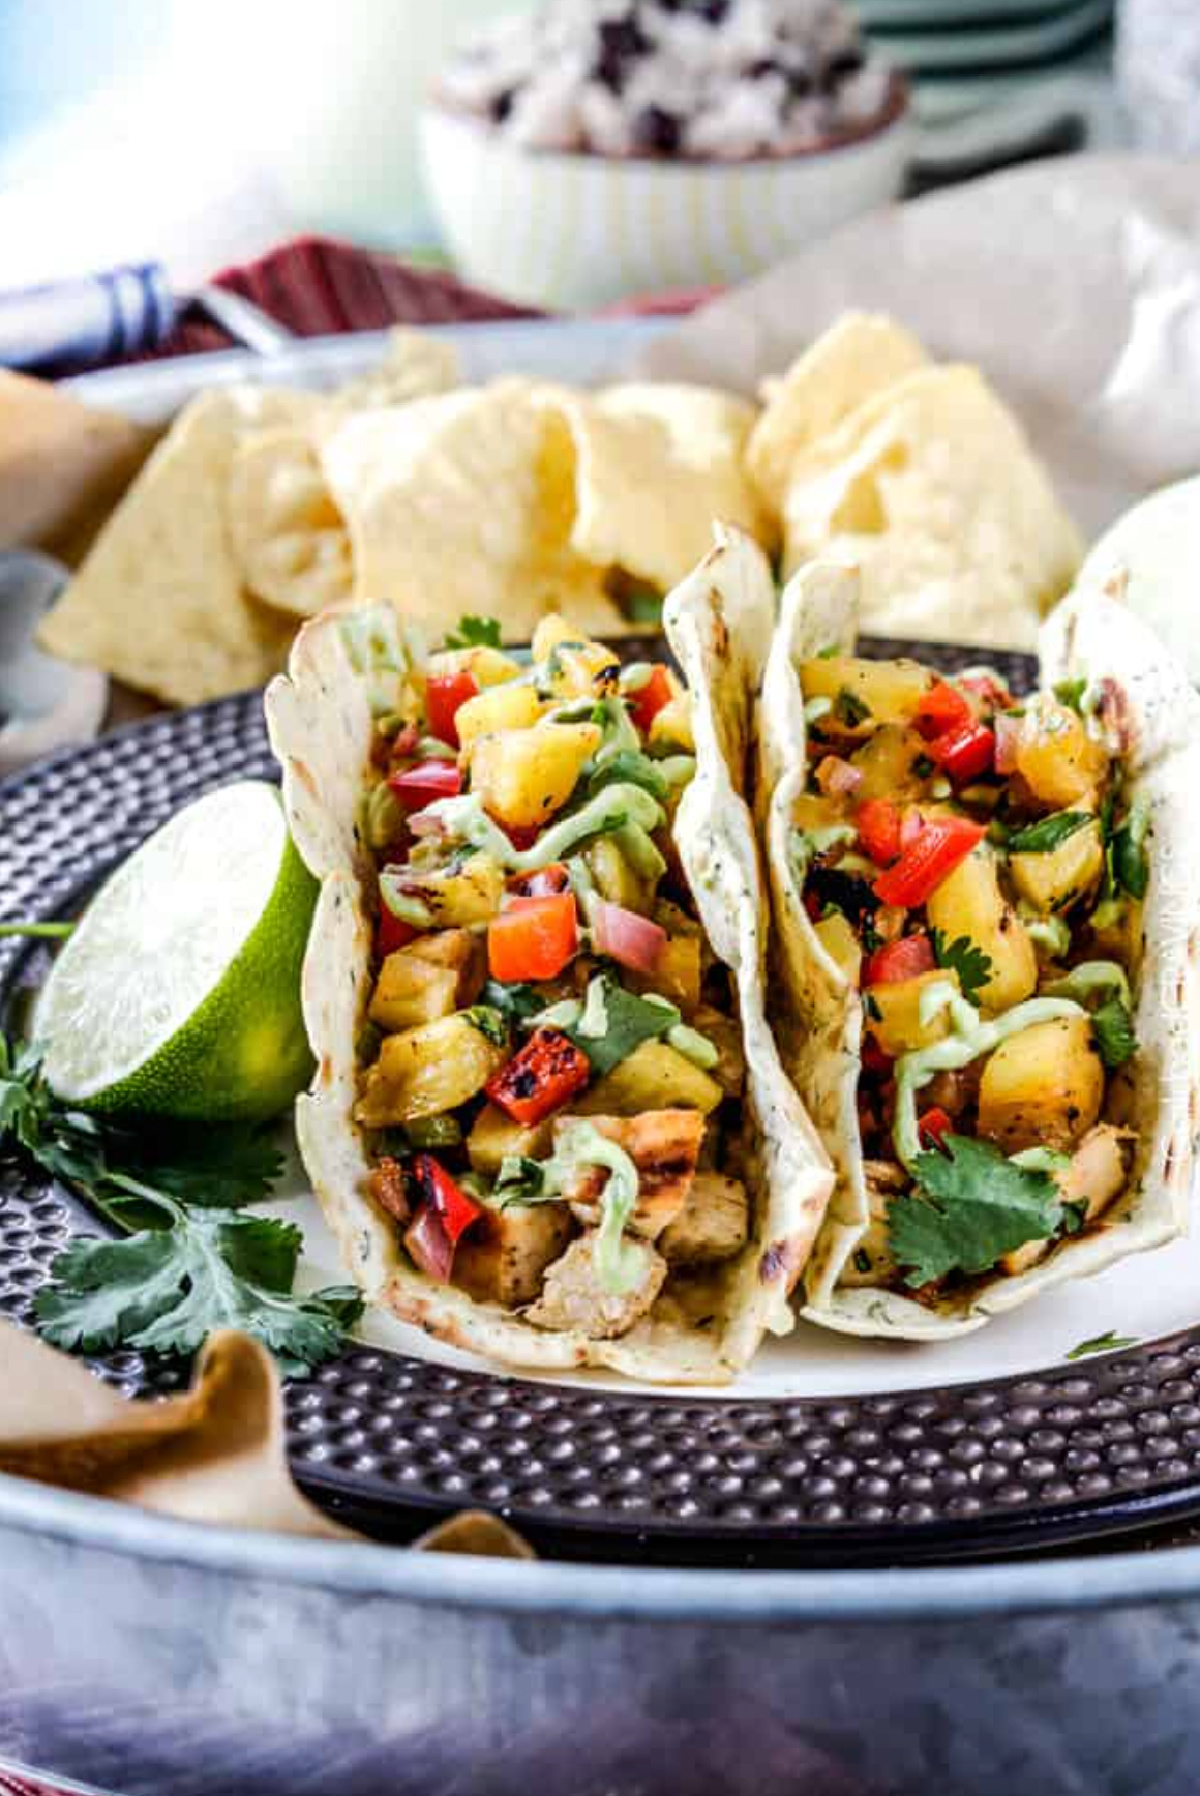 two chili lime chicken tacos